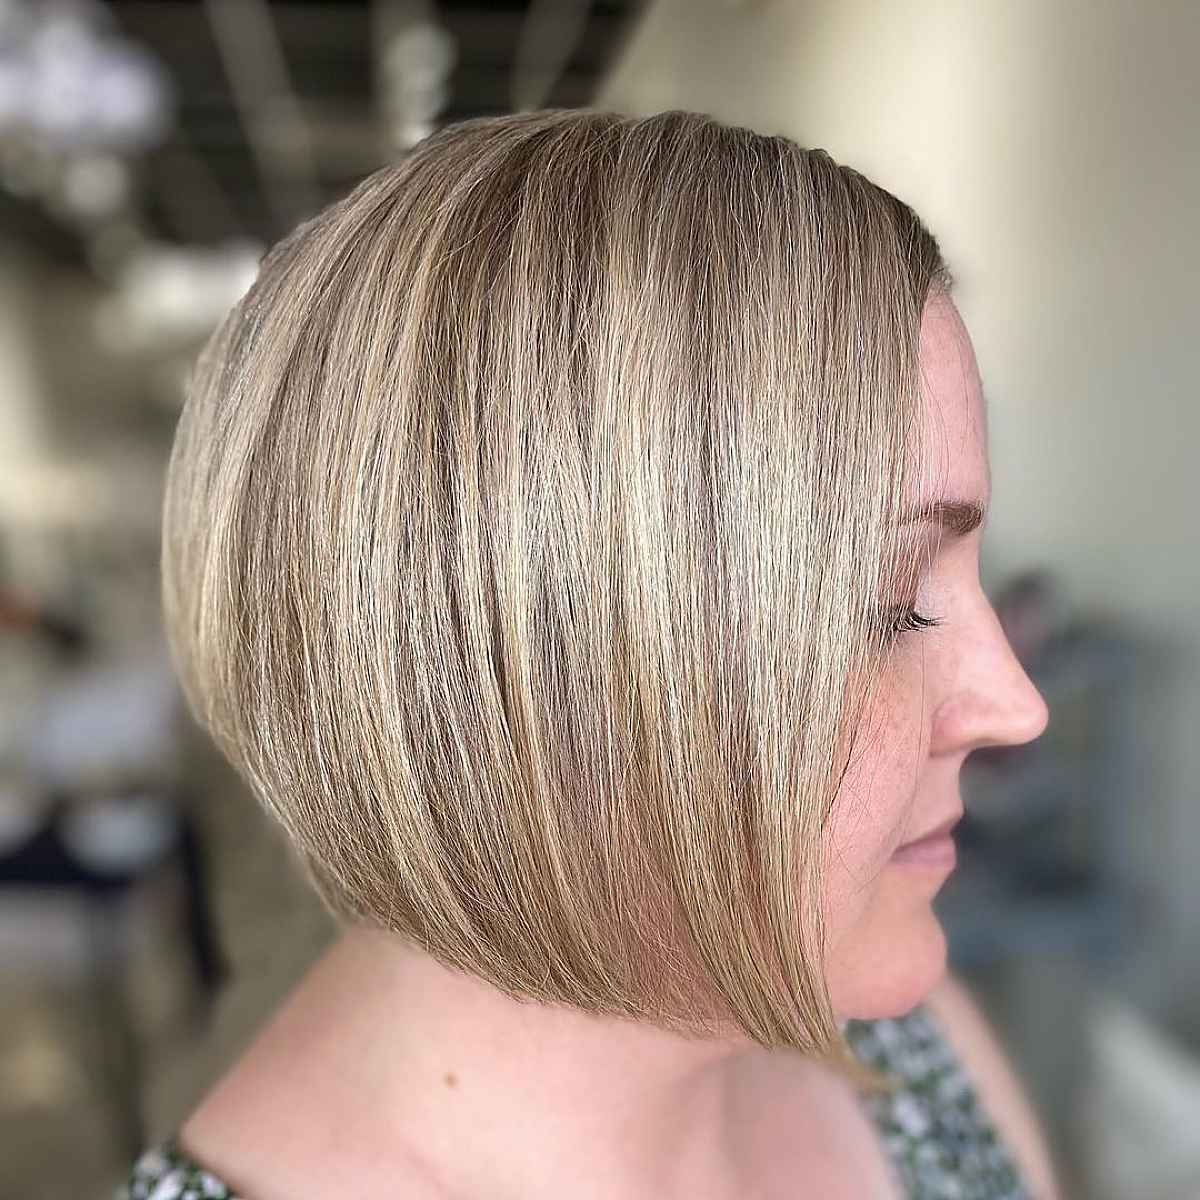 24 Short, Stacked Inverted Bob Haircut Ideas to Spice Up Your Style